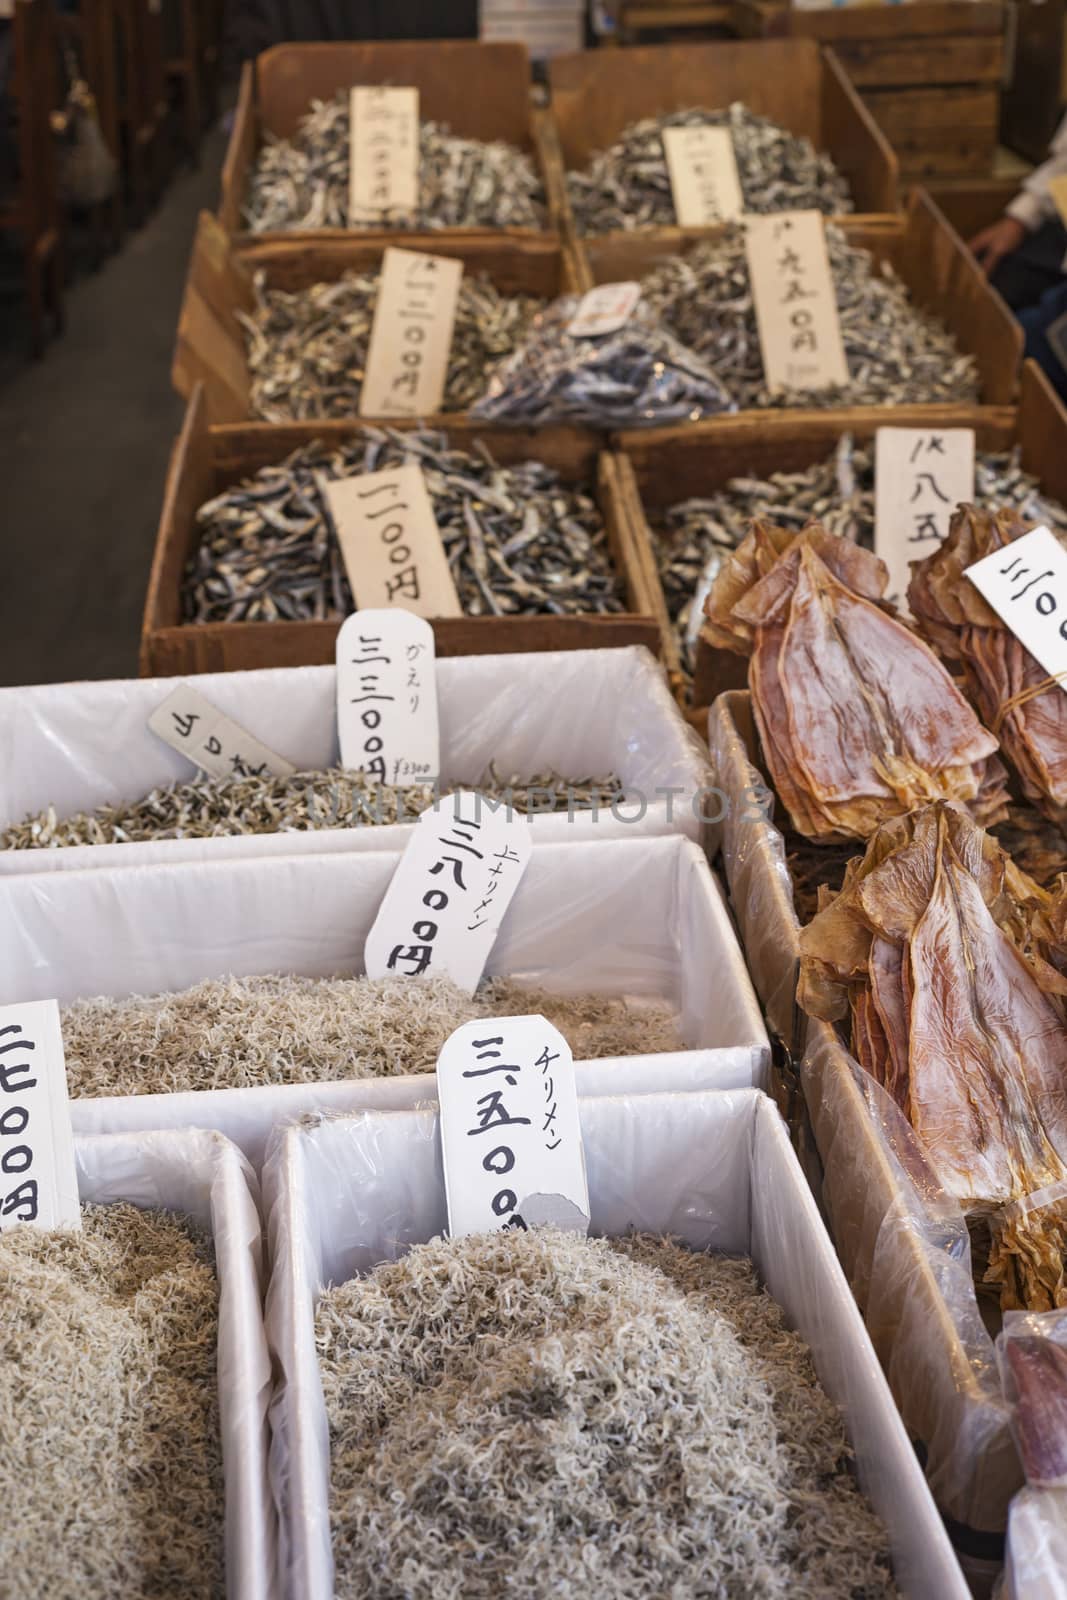 Dried fish, seafood product at market from Japan. by mariusz_prusaczyk